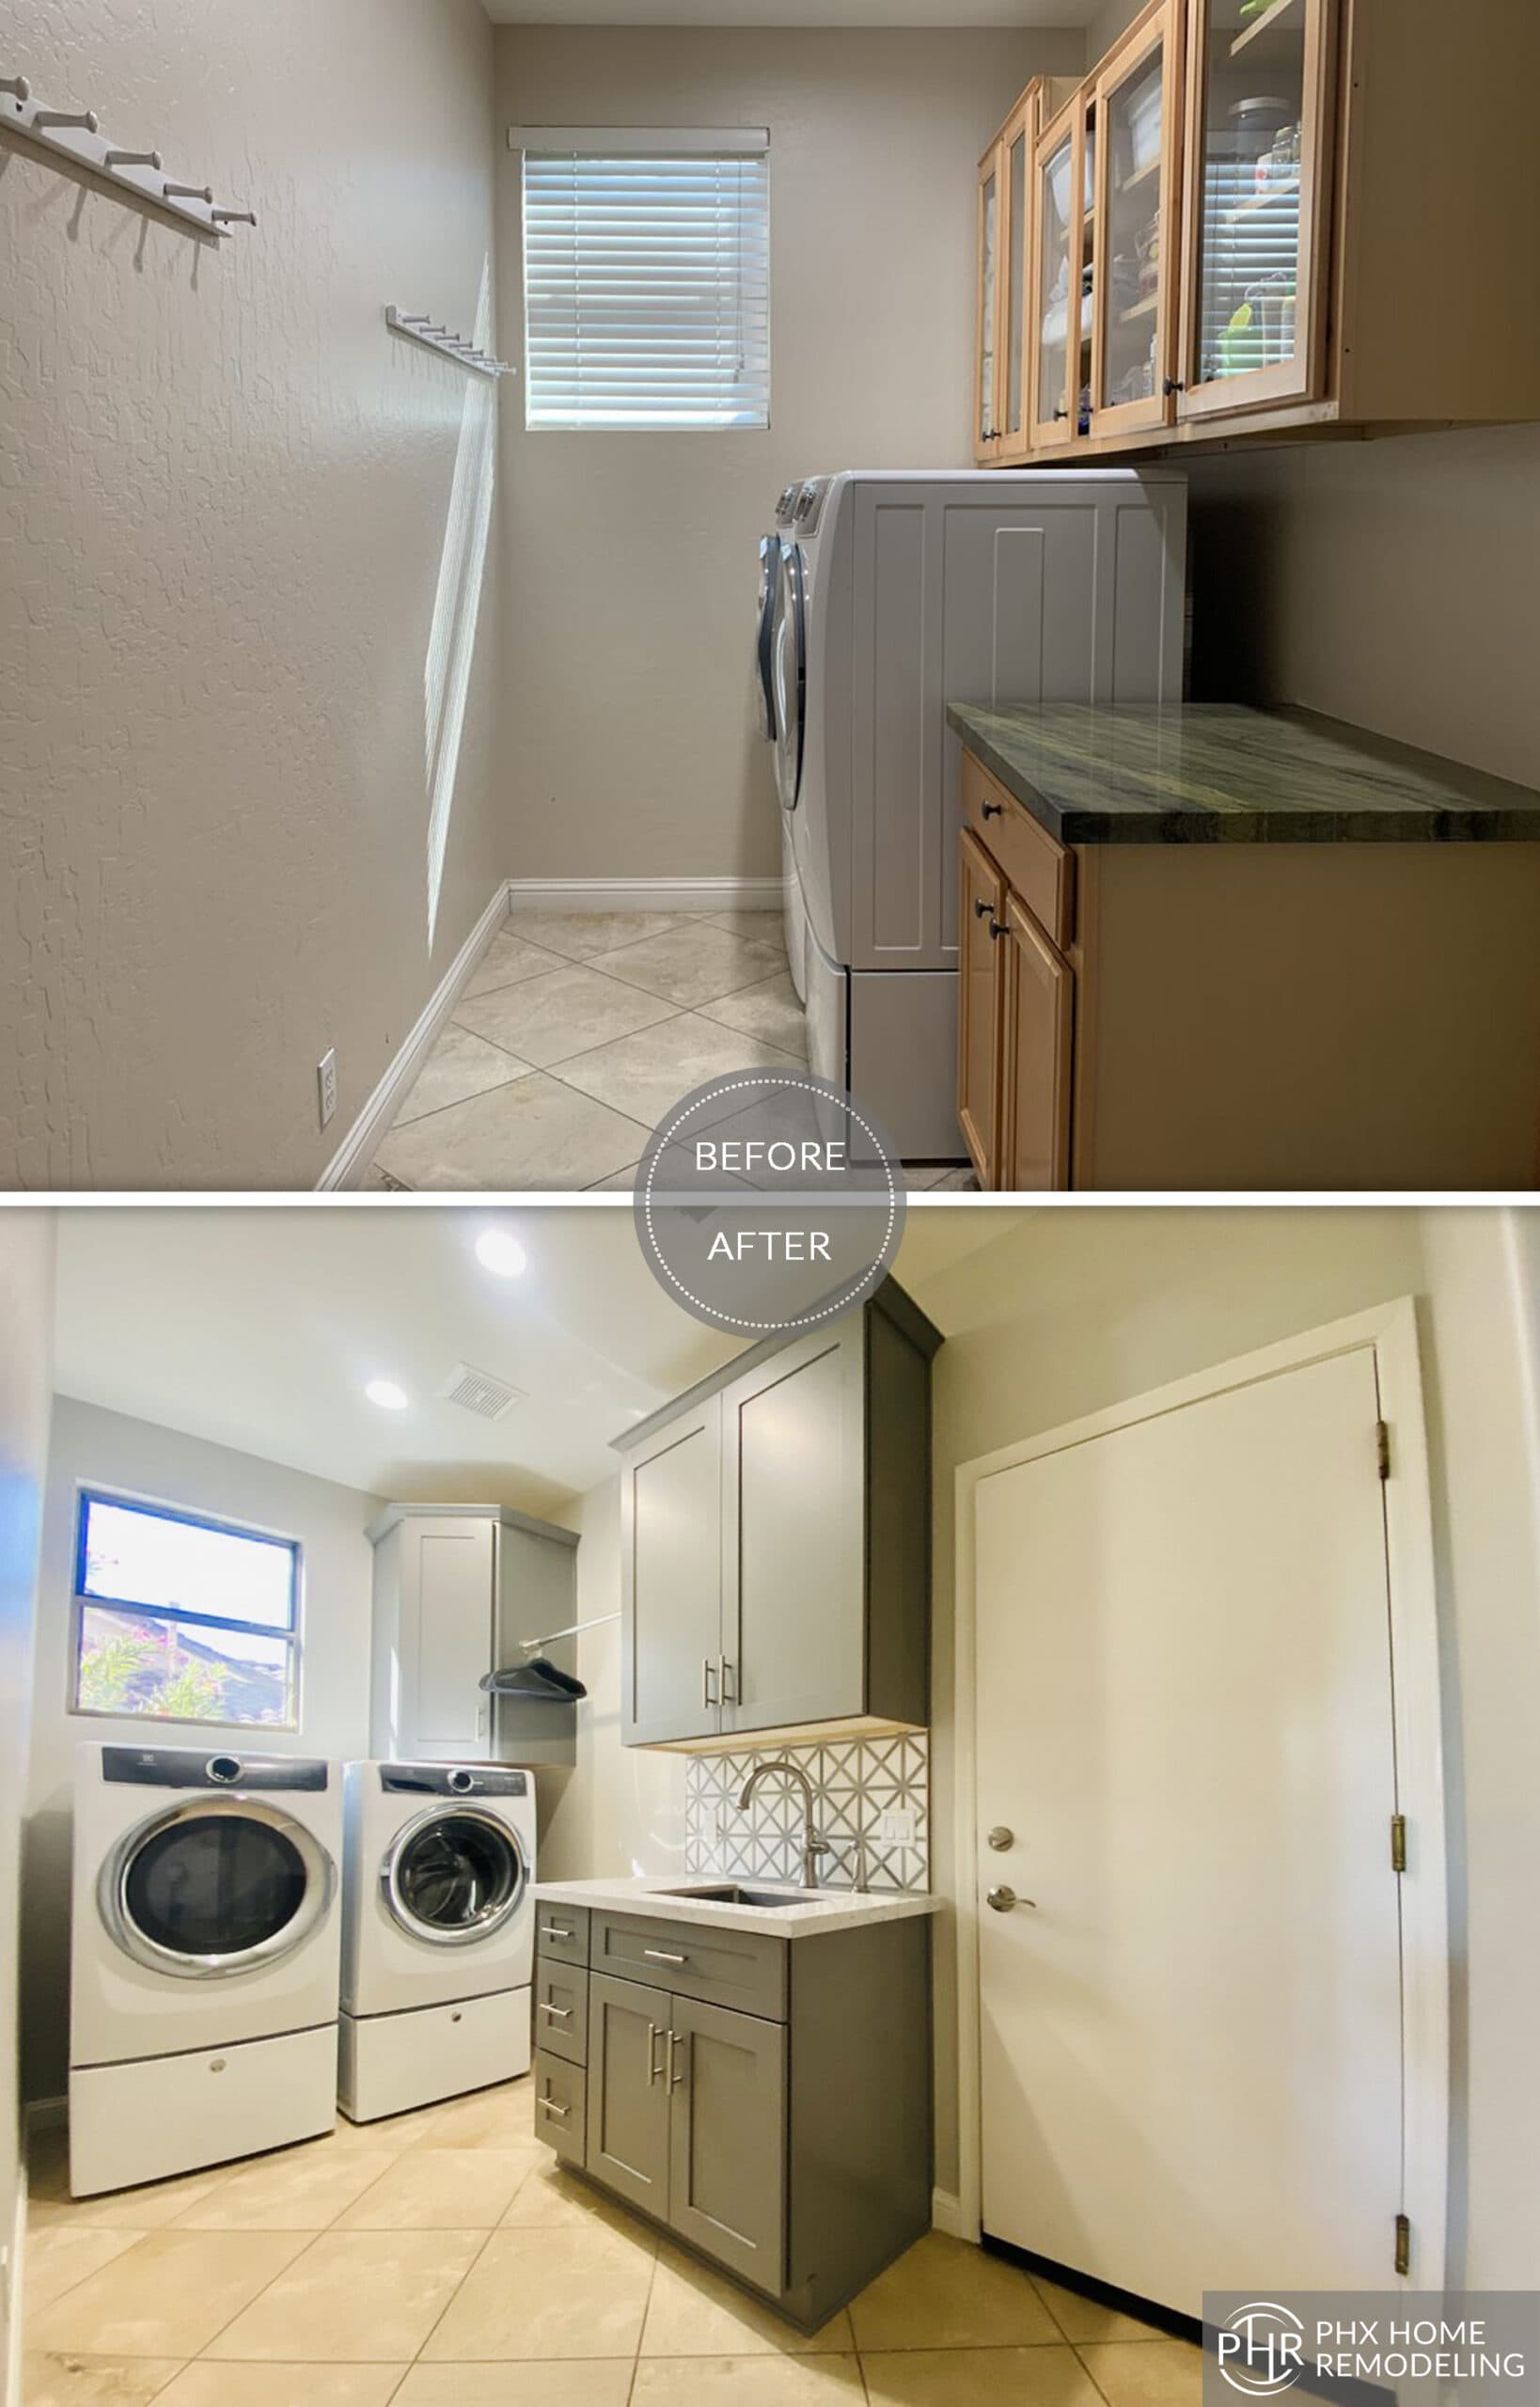 Impressive Home Renovation Before And After Results